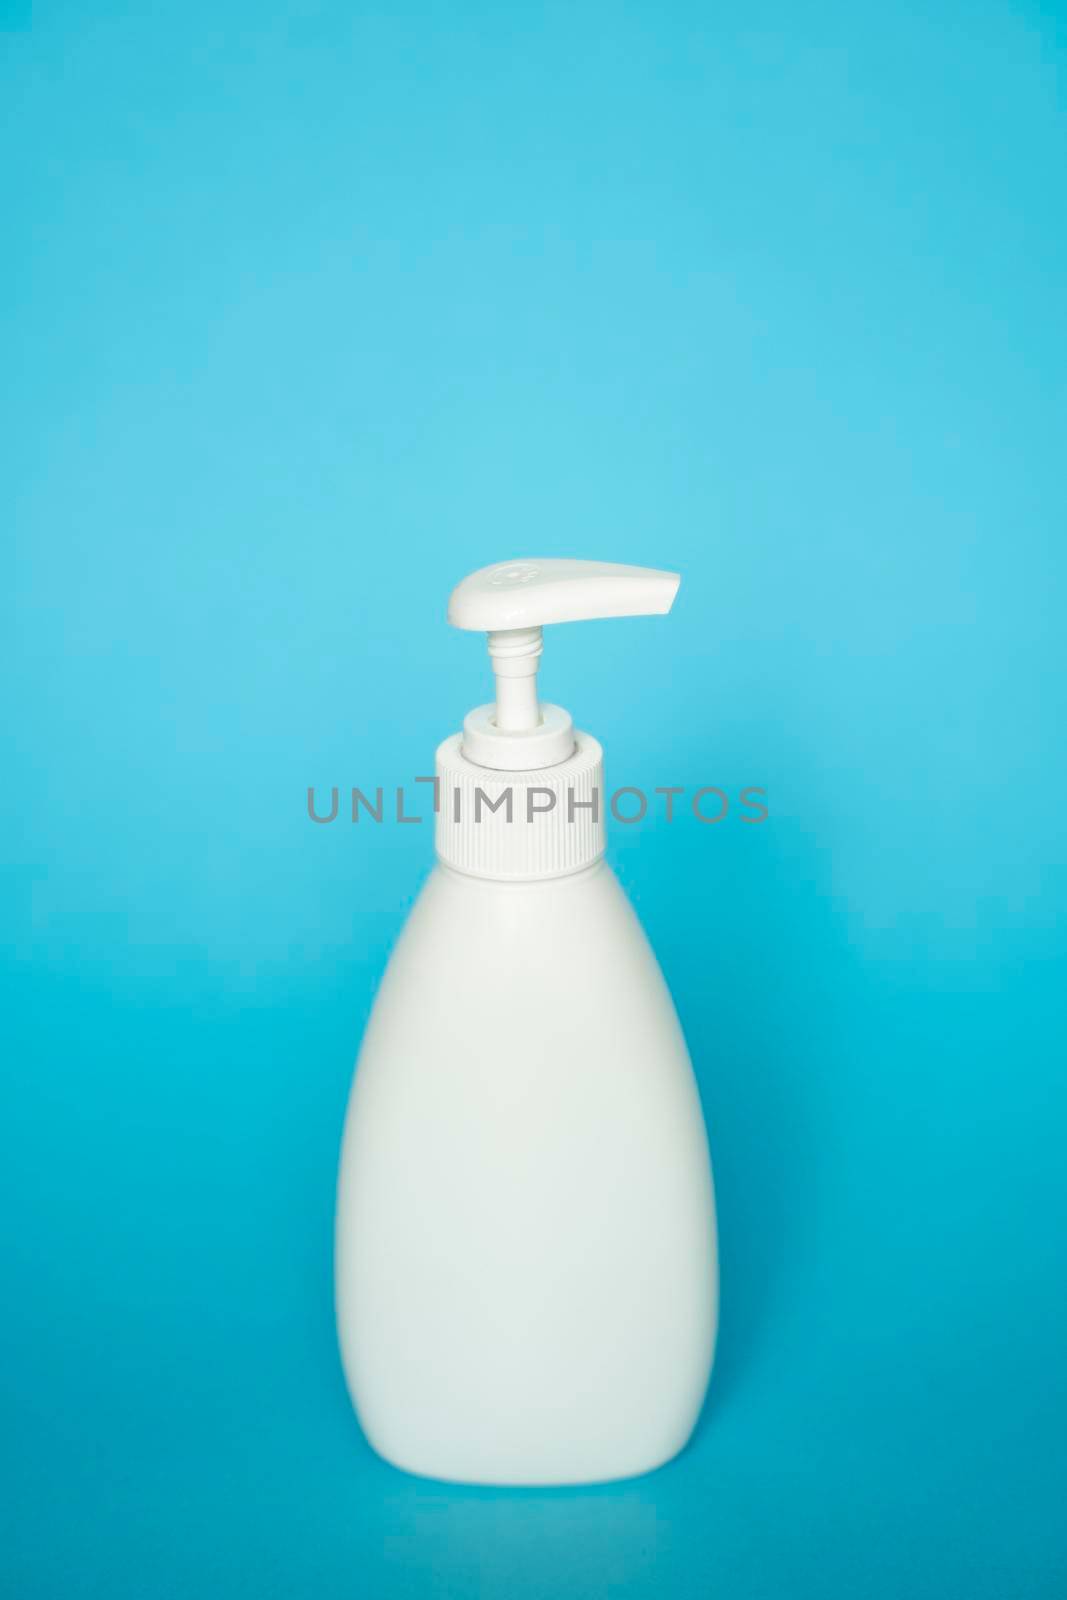 Liquid container for gel, lotion, cream, shampoo, bath foam. Cosmetic plastic bottle with white dispenser pump. Mock up template for design